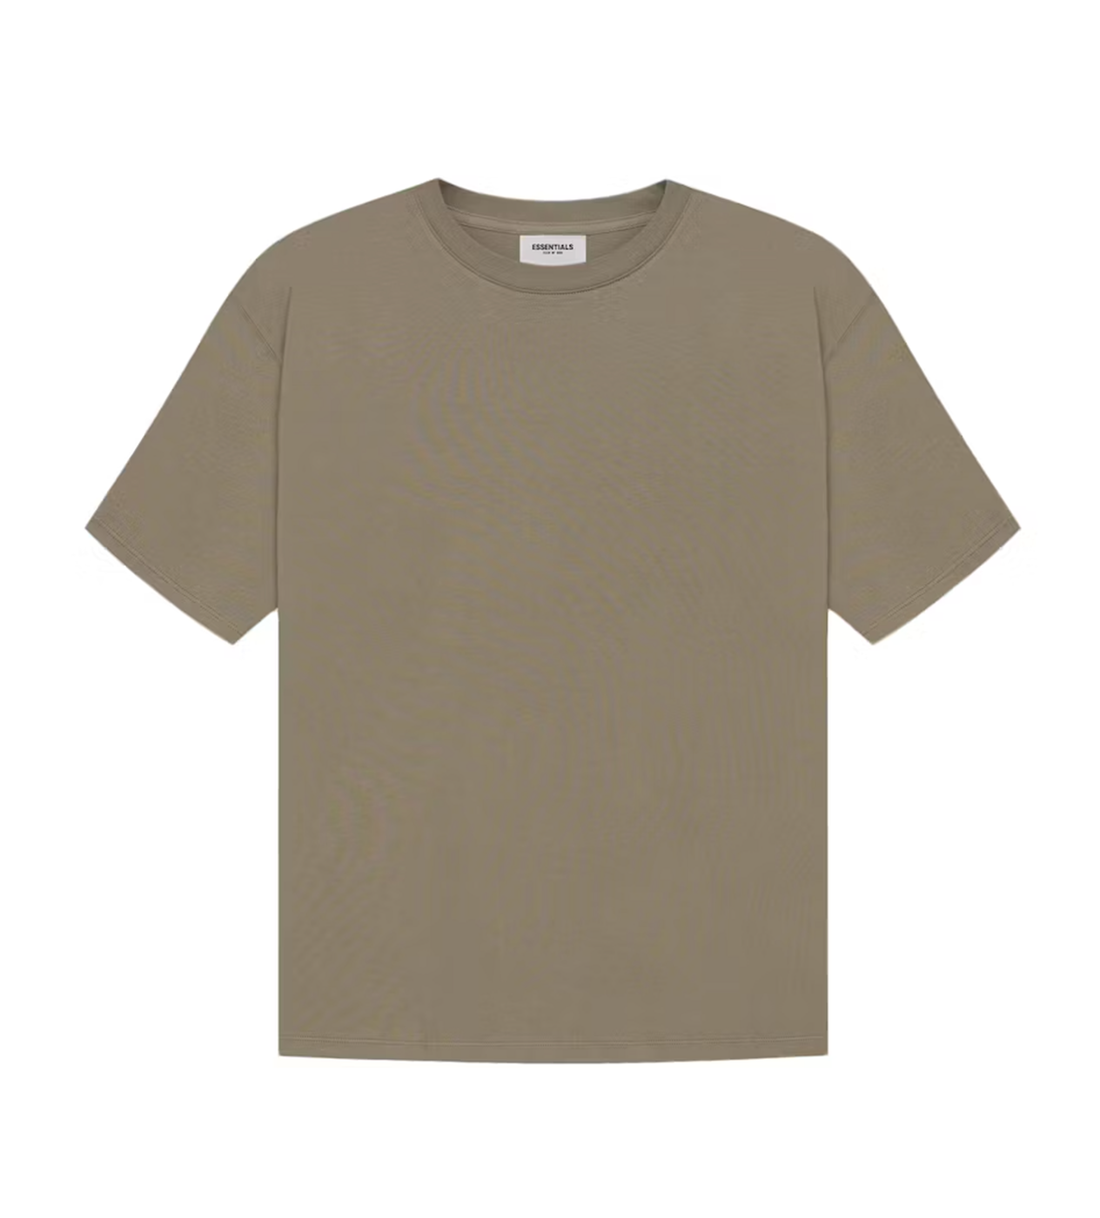 Essentials Taupe Tee Back Logo